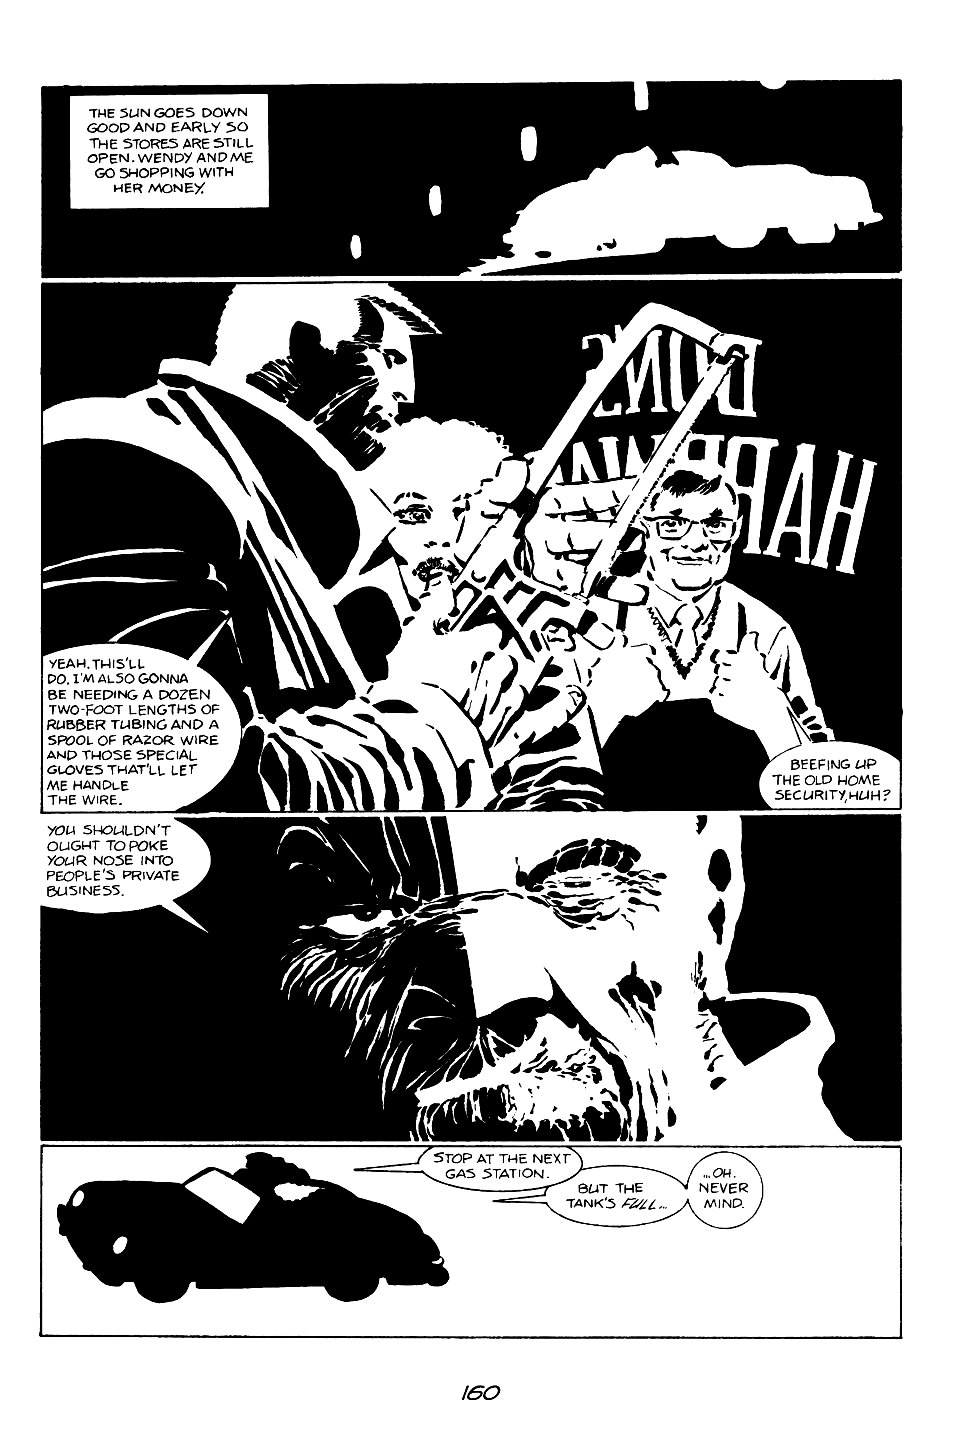 page 160 of sin city 1 the hard goodbye